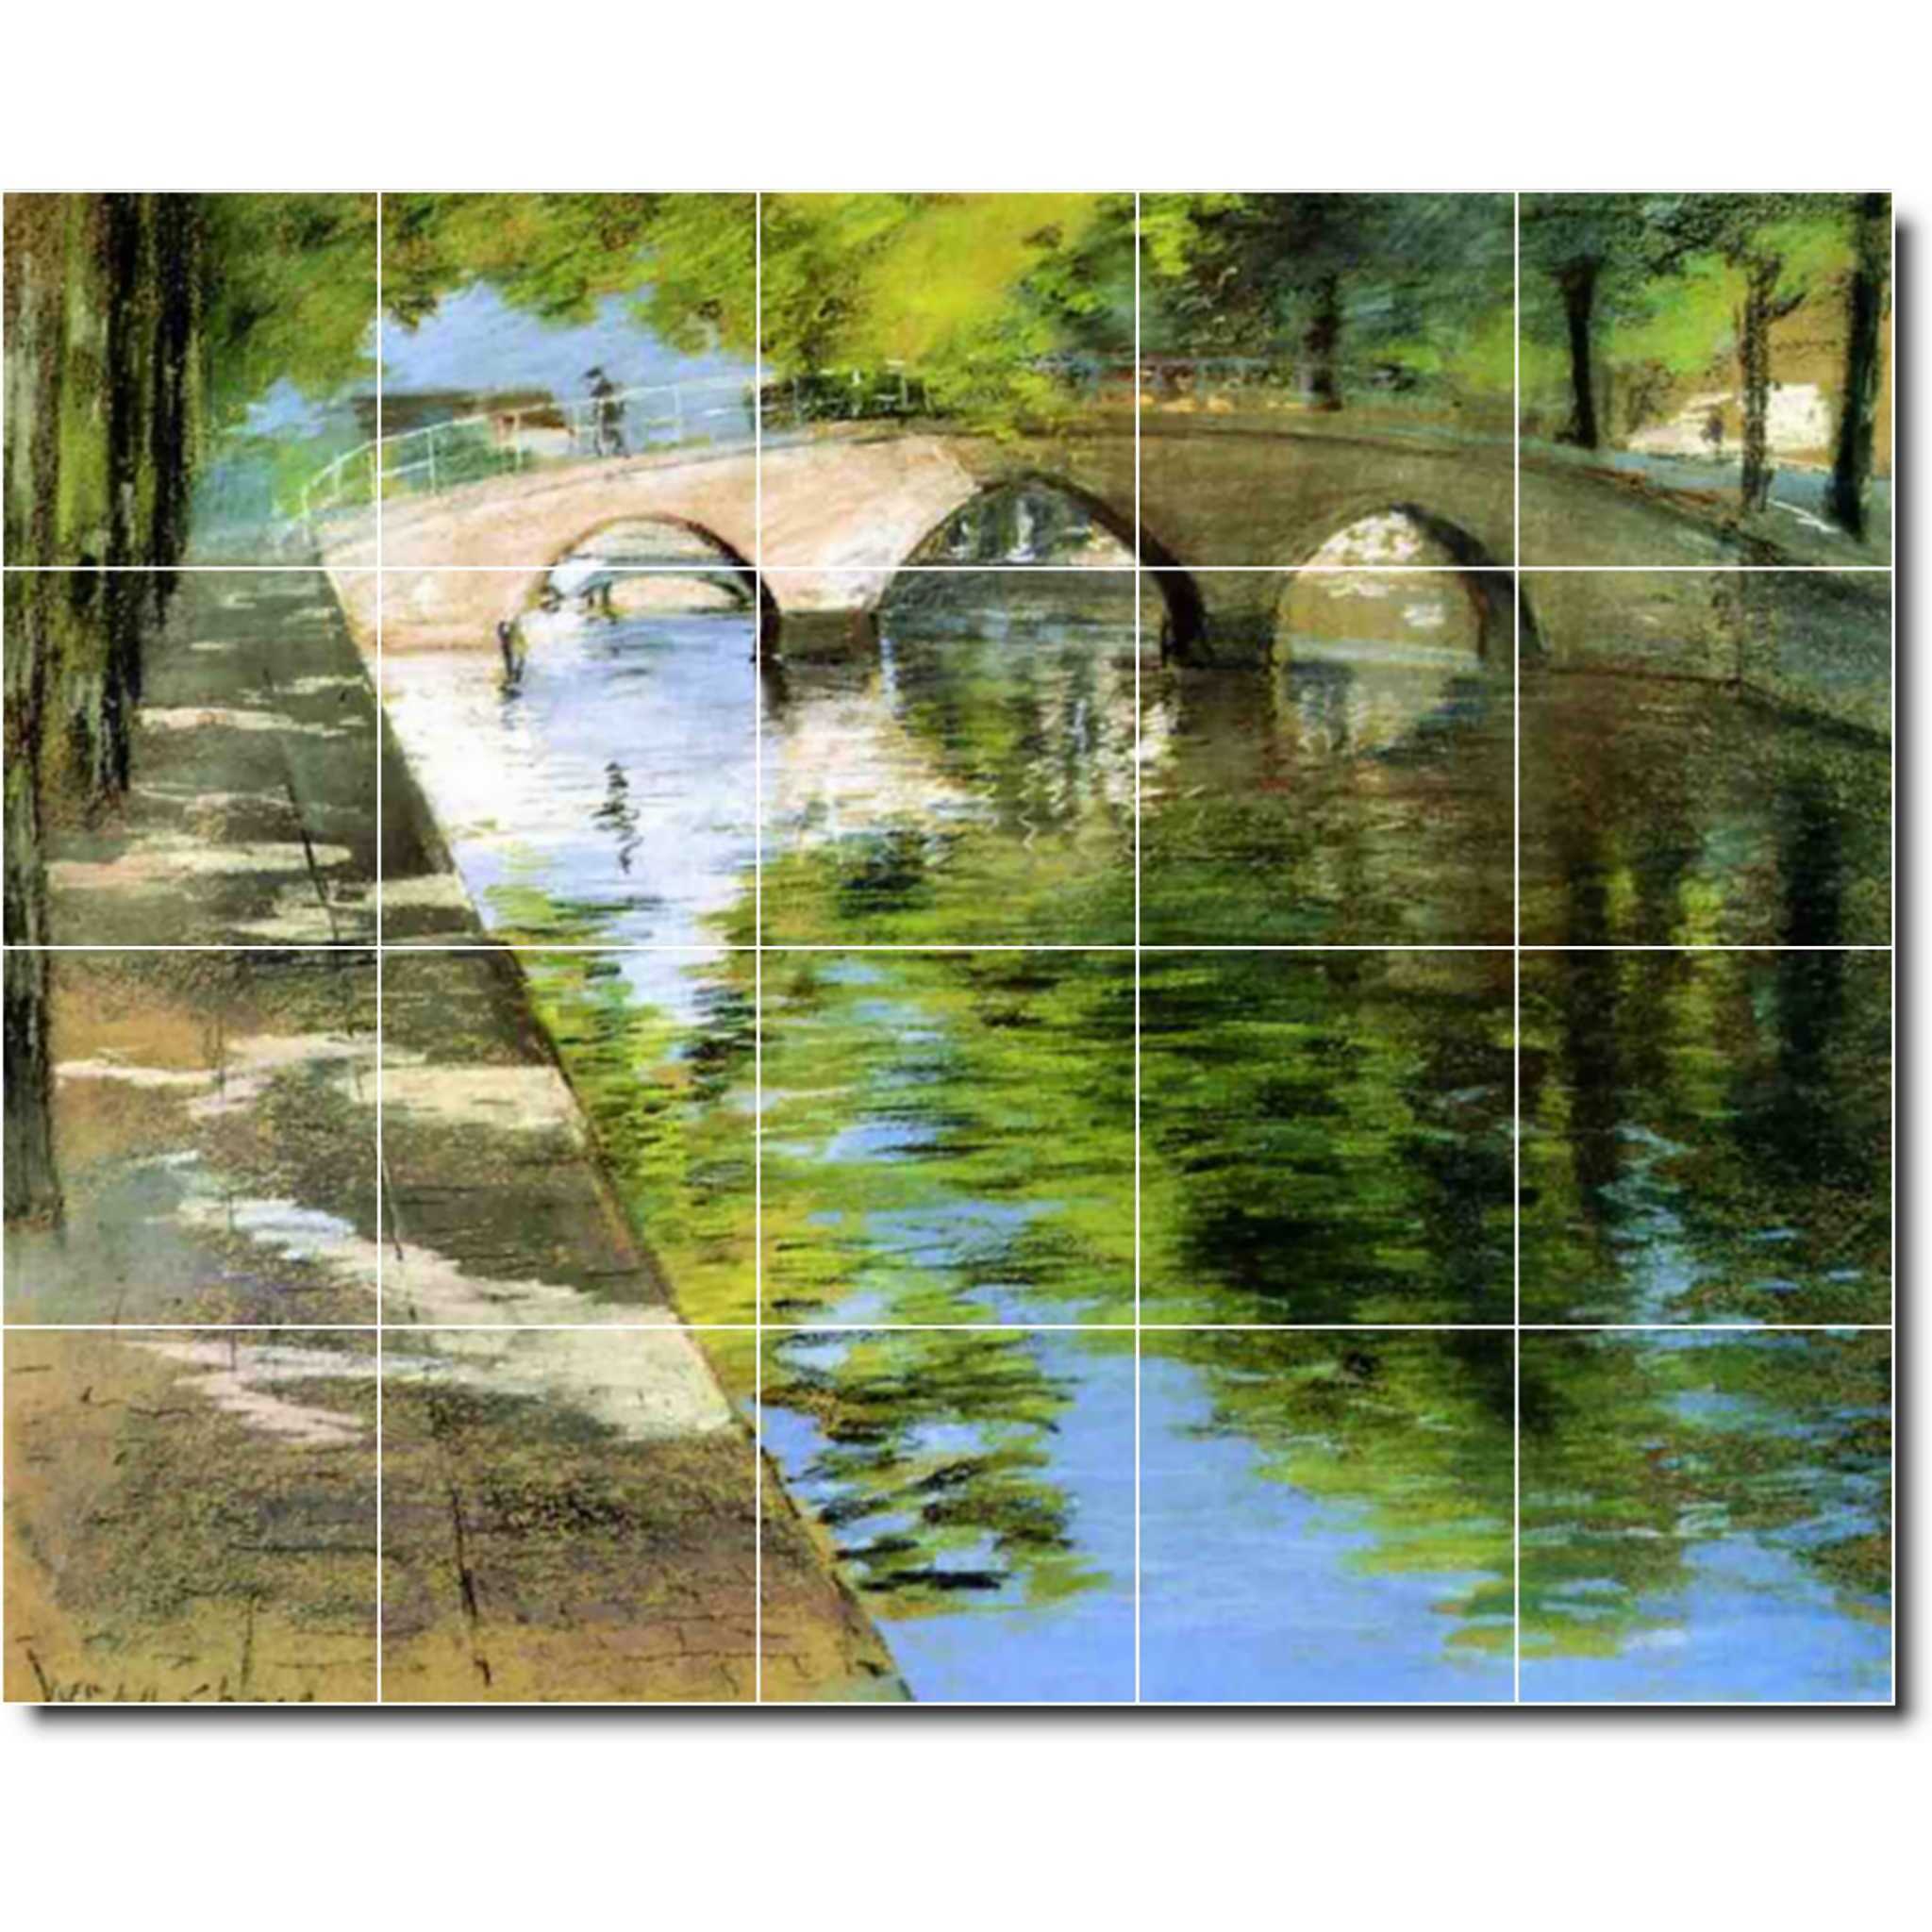 william chase waterfront painting ceramic tile mural p01615